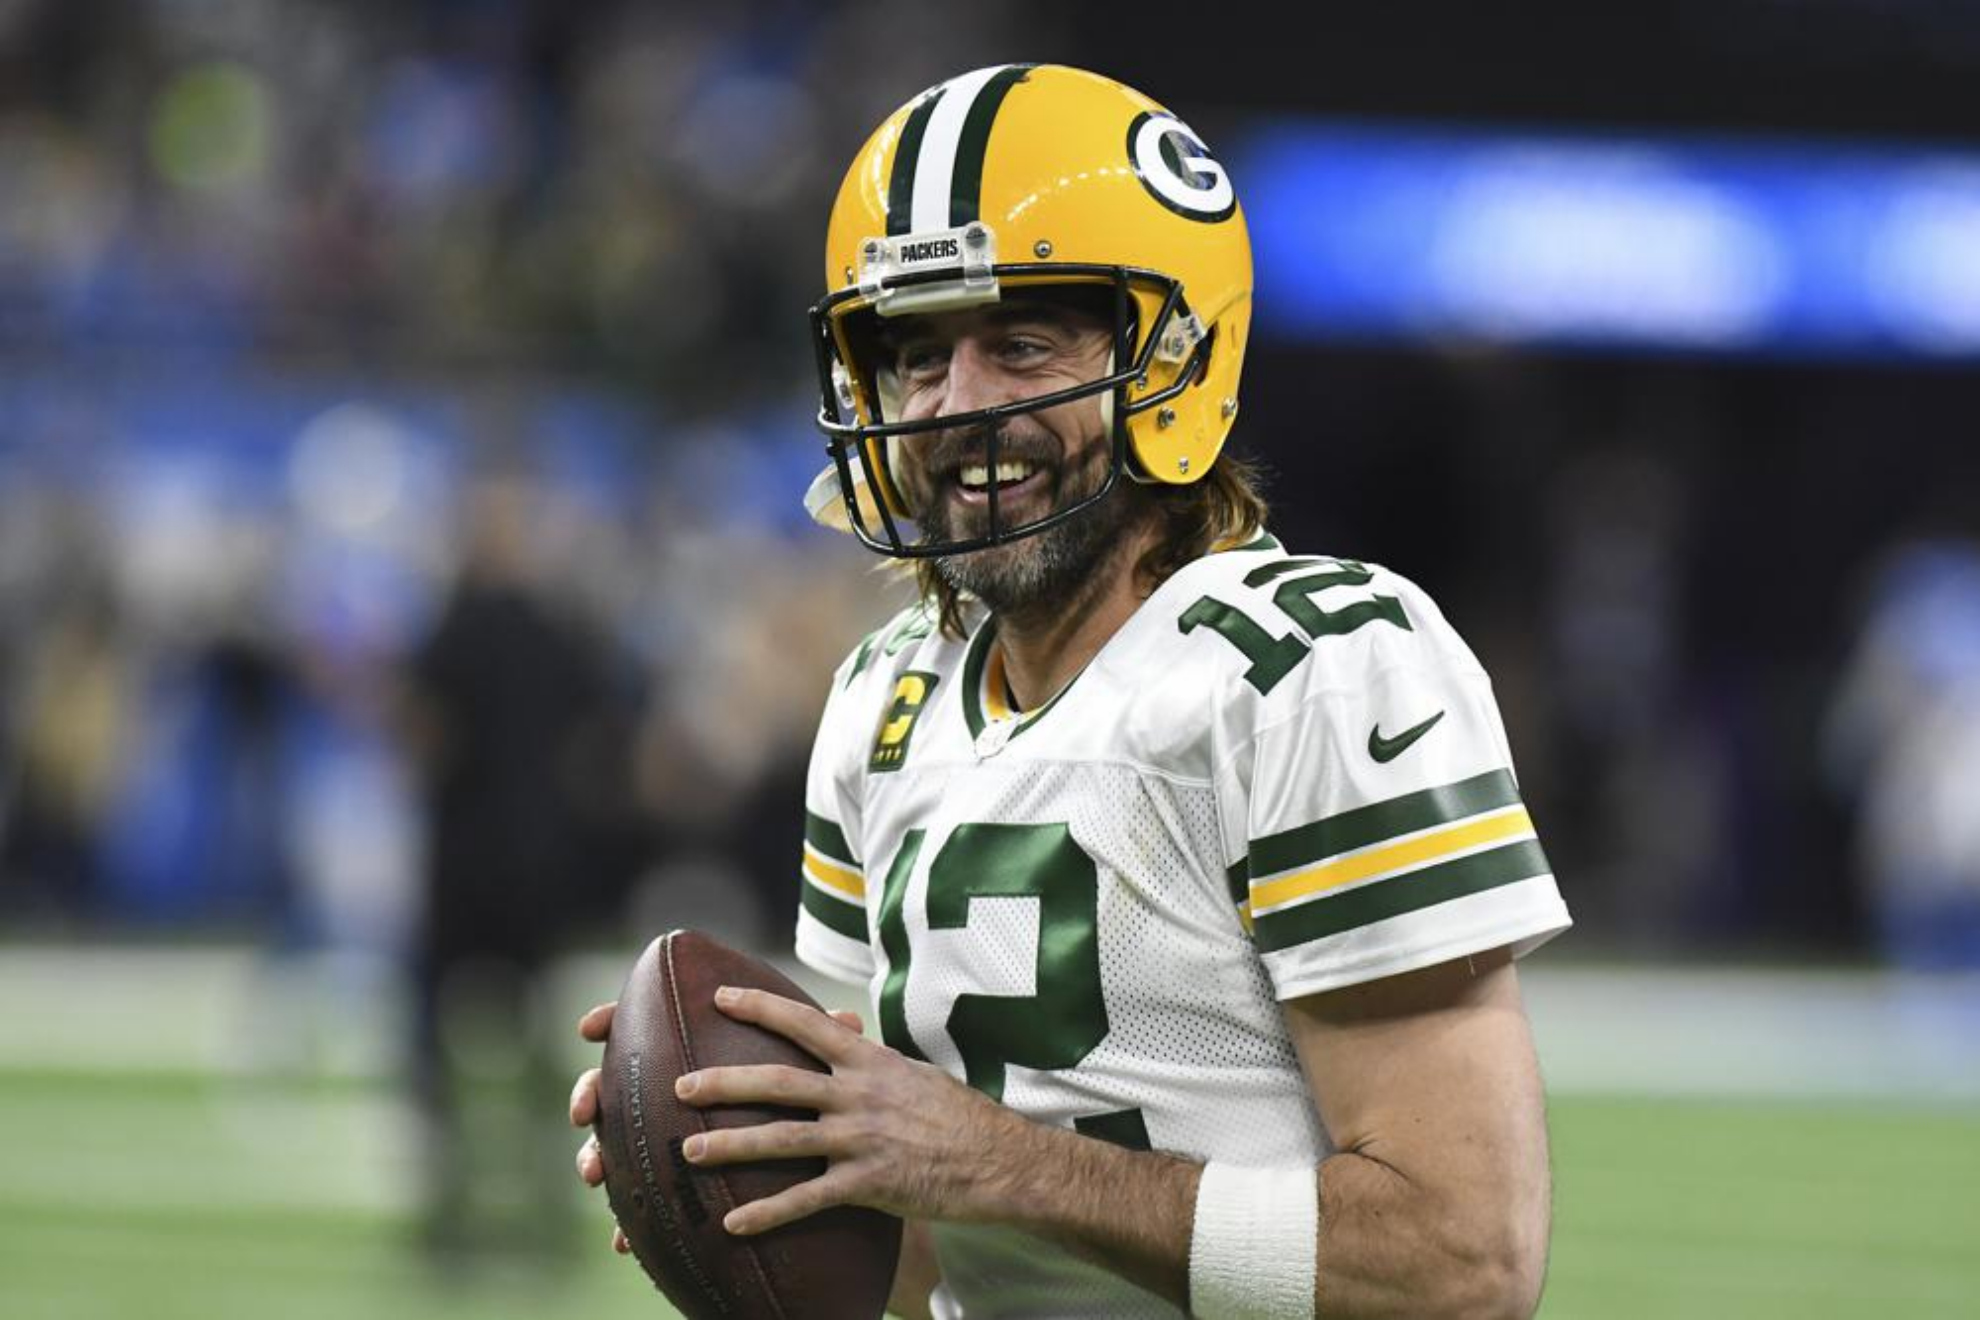 Aaron Rodgers will address his future in the NFL as the new season kicks off.